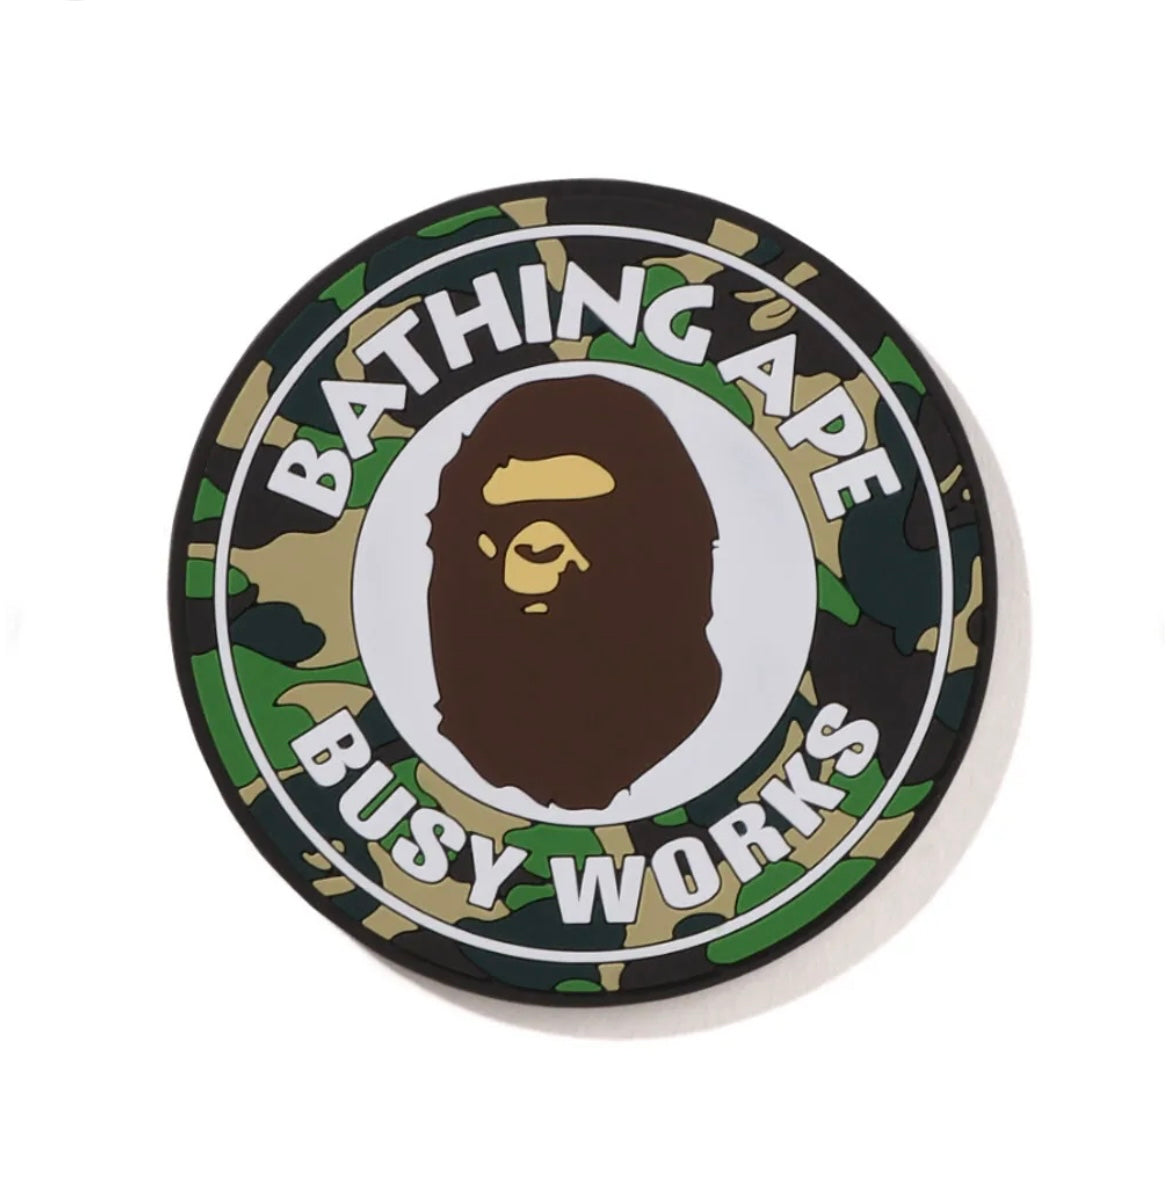 A Bathing Ape ABC Camo Busy Works Rubber Coaster Green